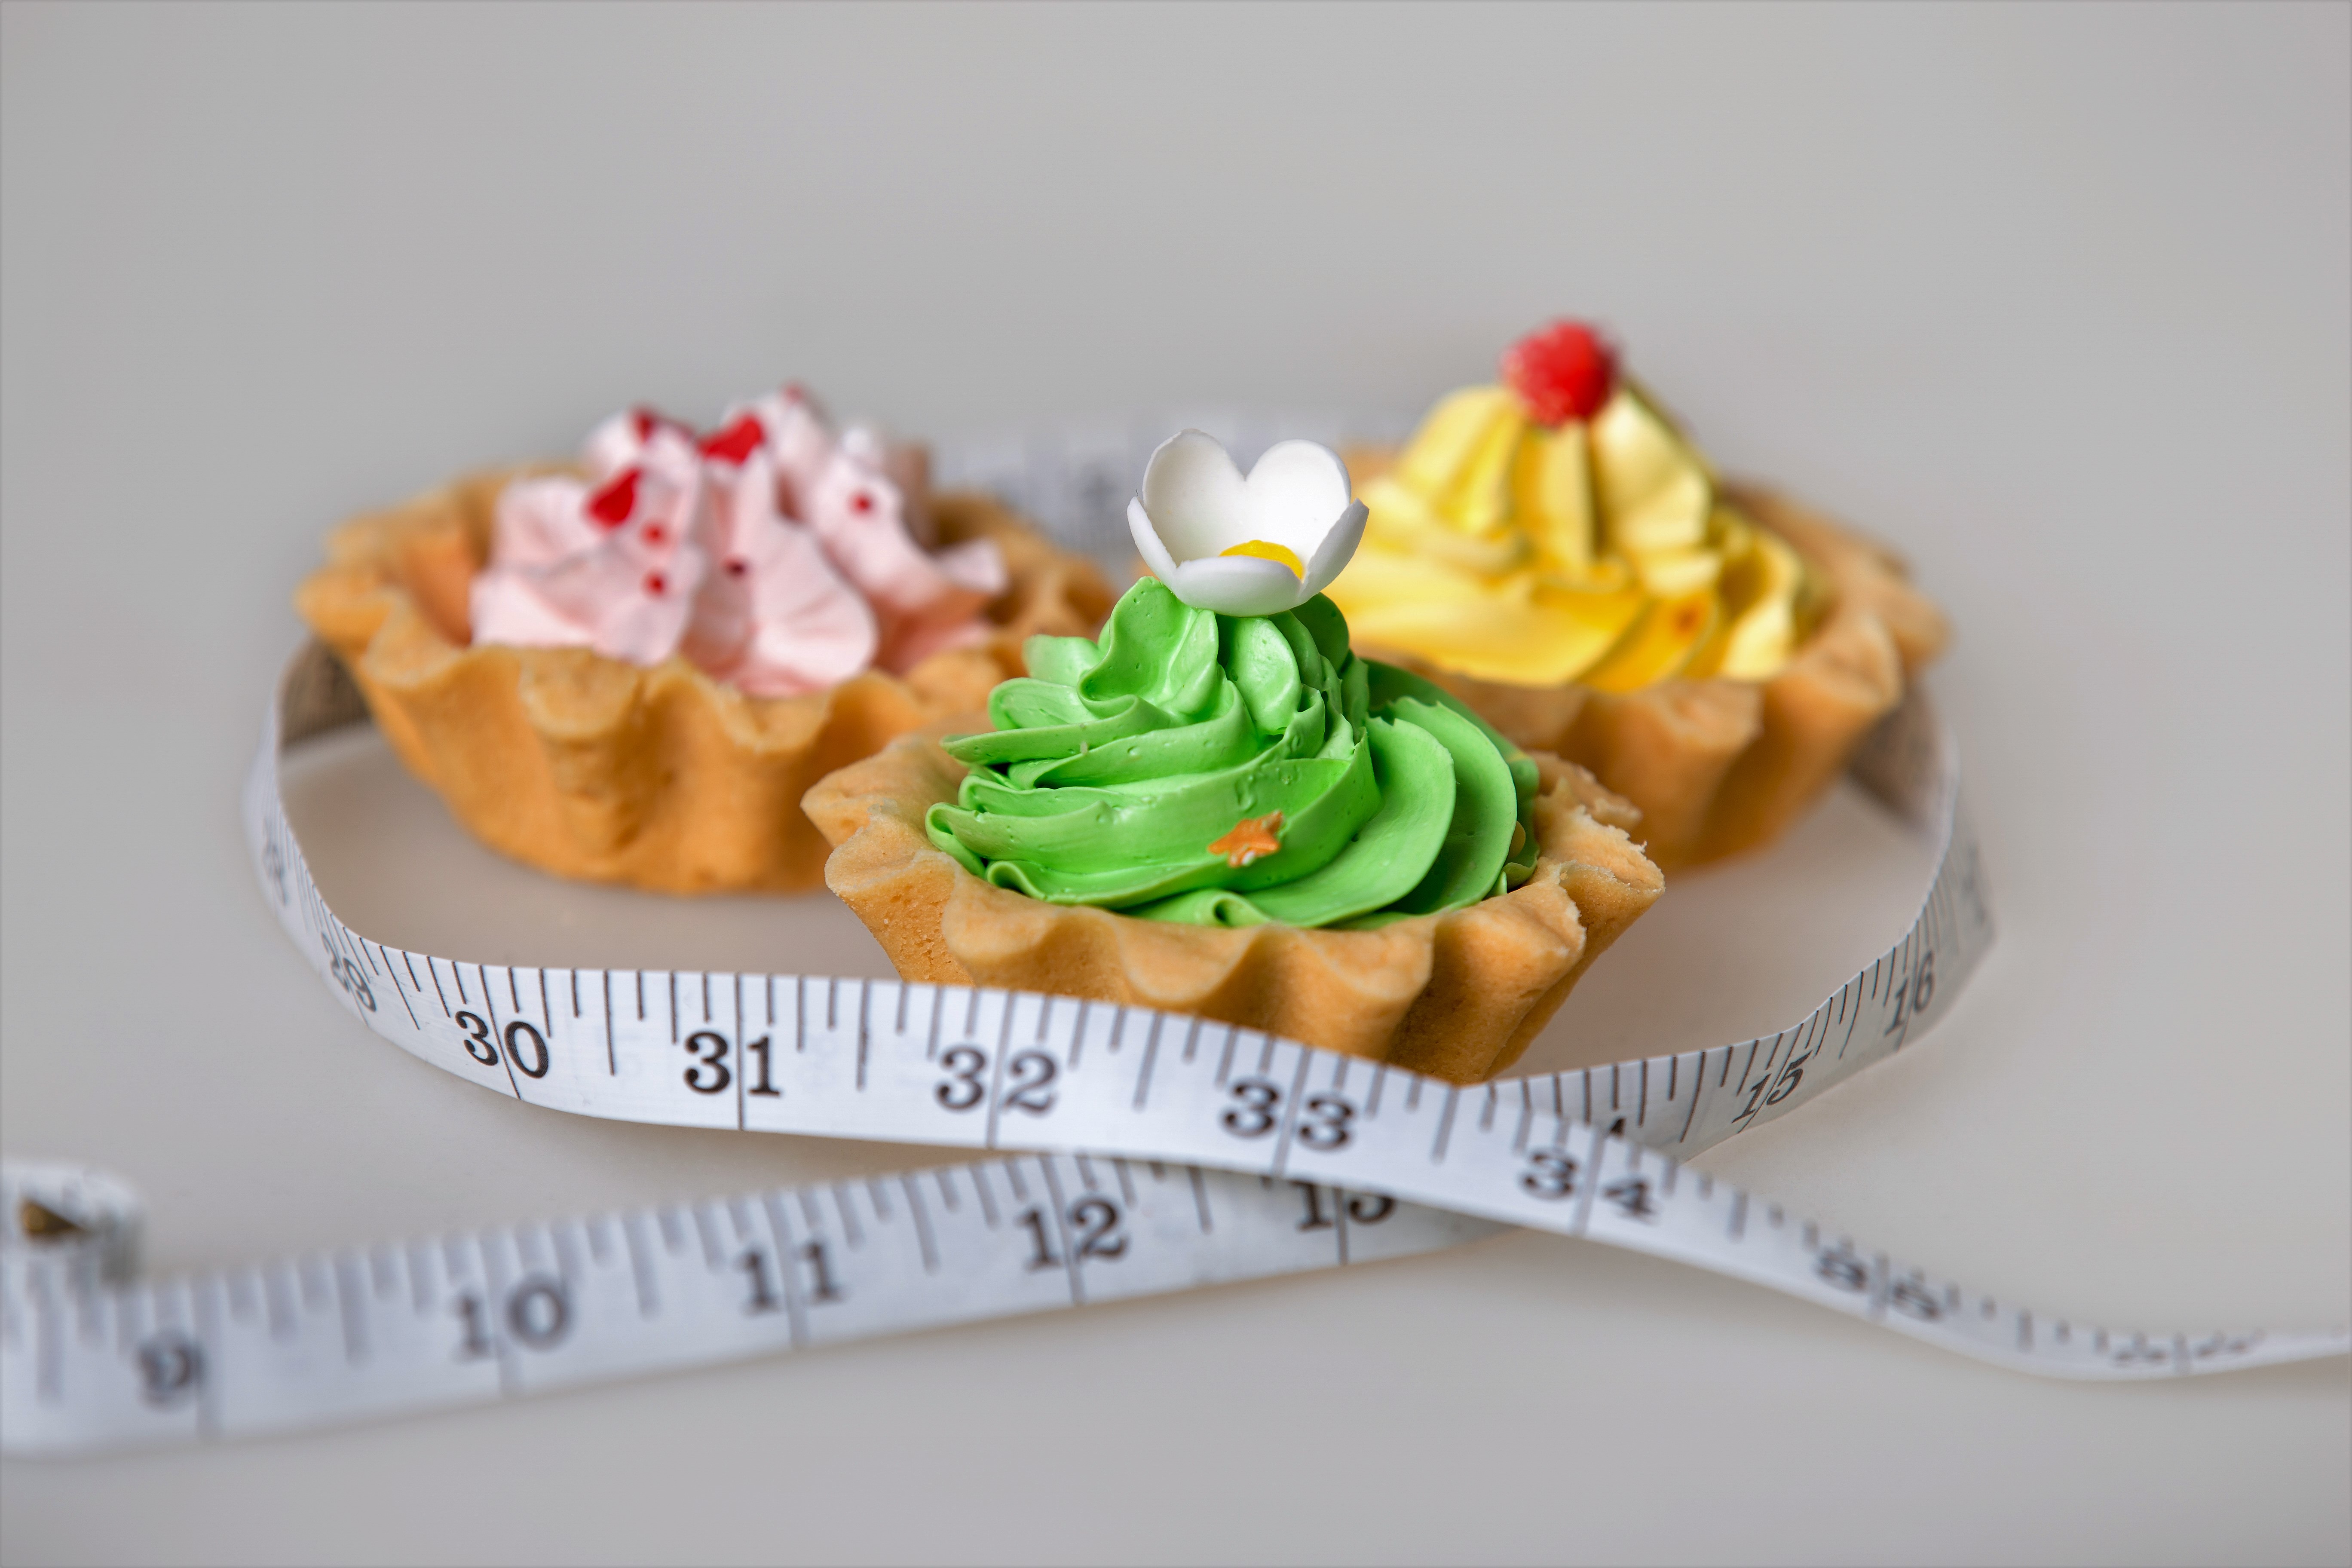 Three colorful green, pink and yellow tart cakes wrapped in measuring tape on white background, unhealthy lifestyle concept, studio